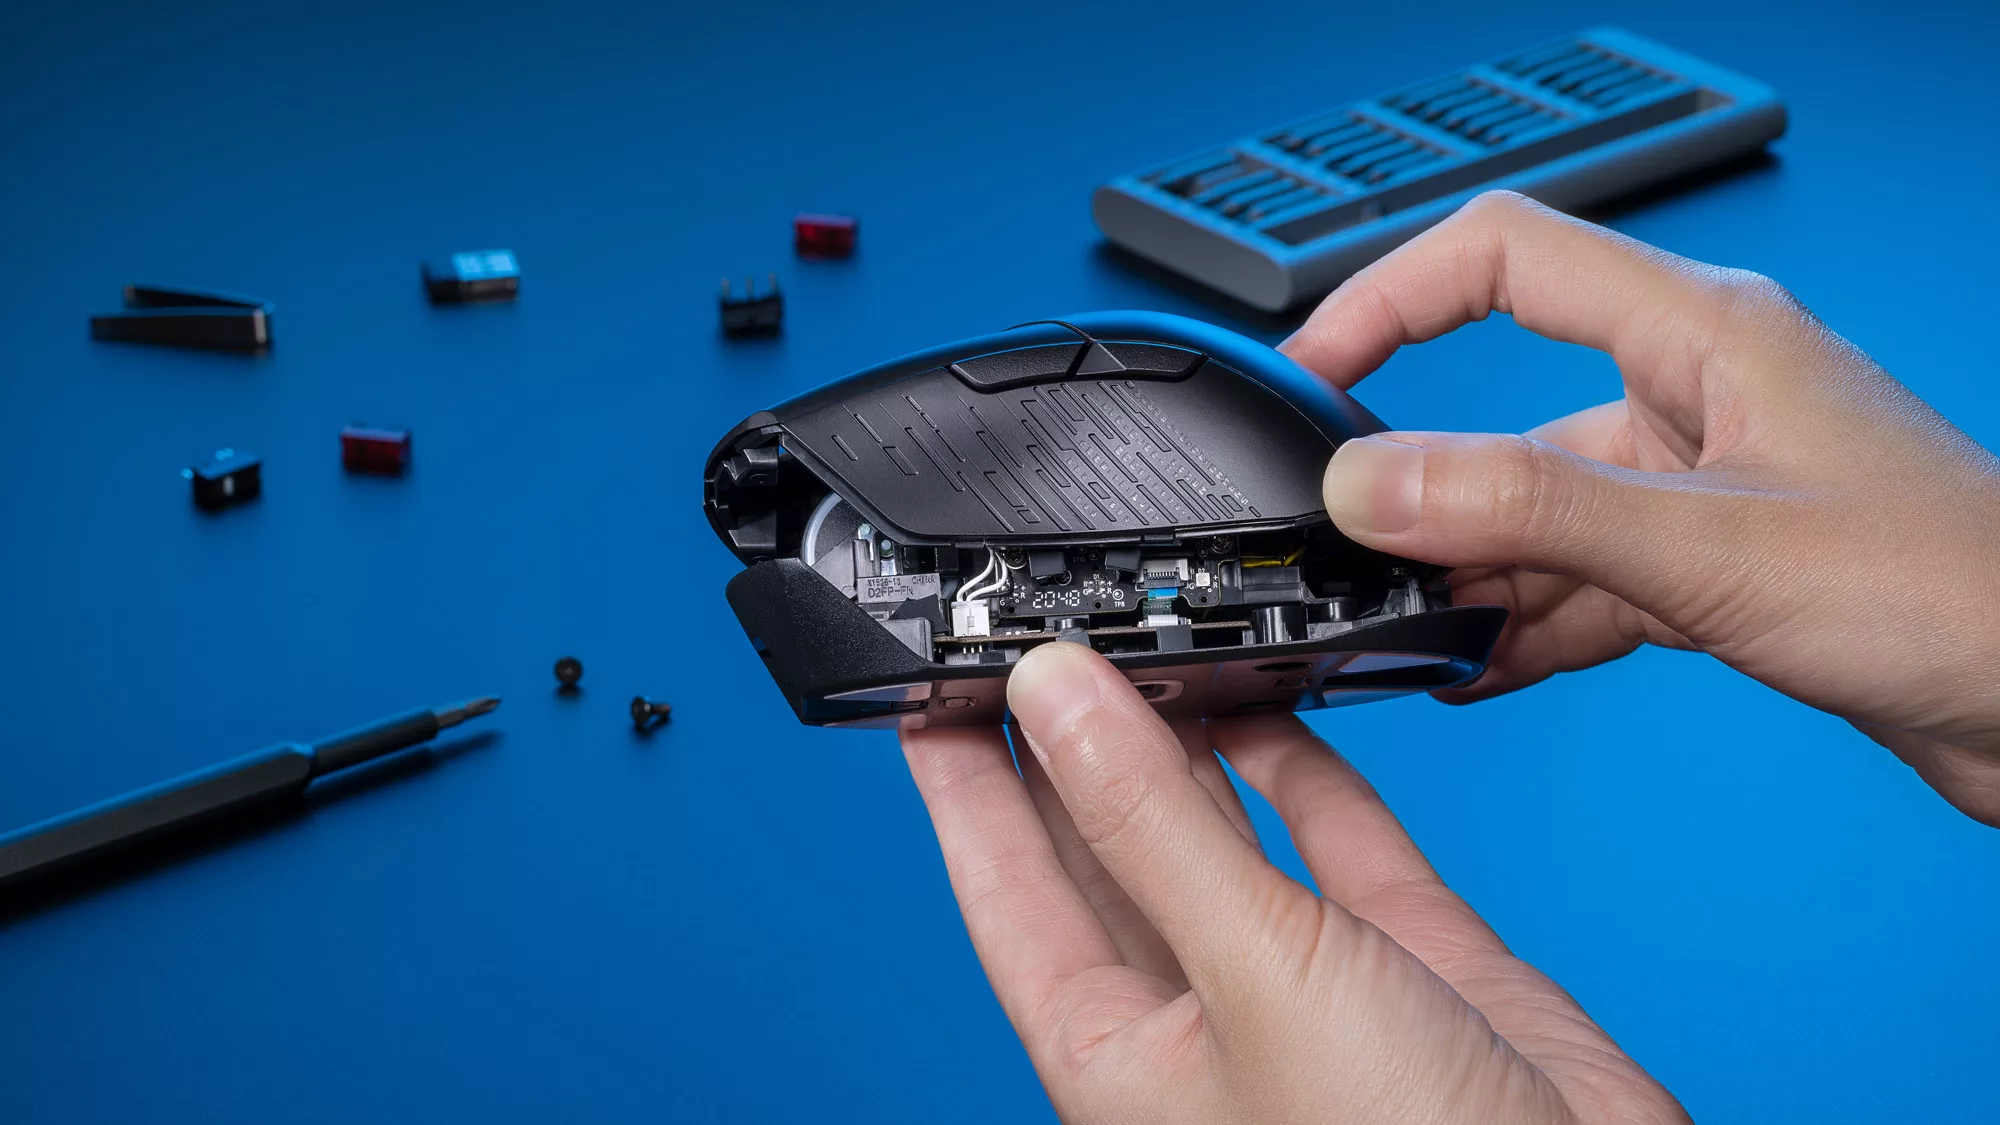 A photo of a hand removing the top cover of a gaming mouse to reveal the internals.